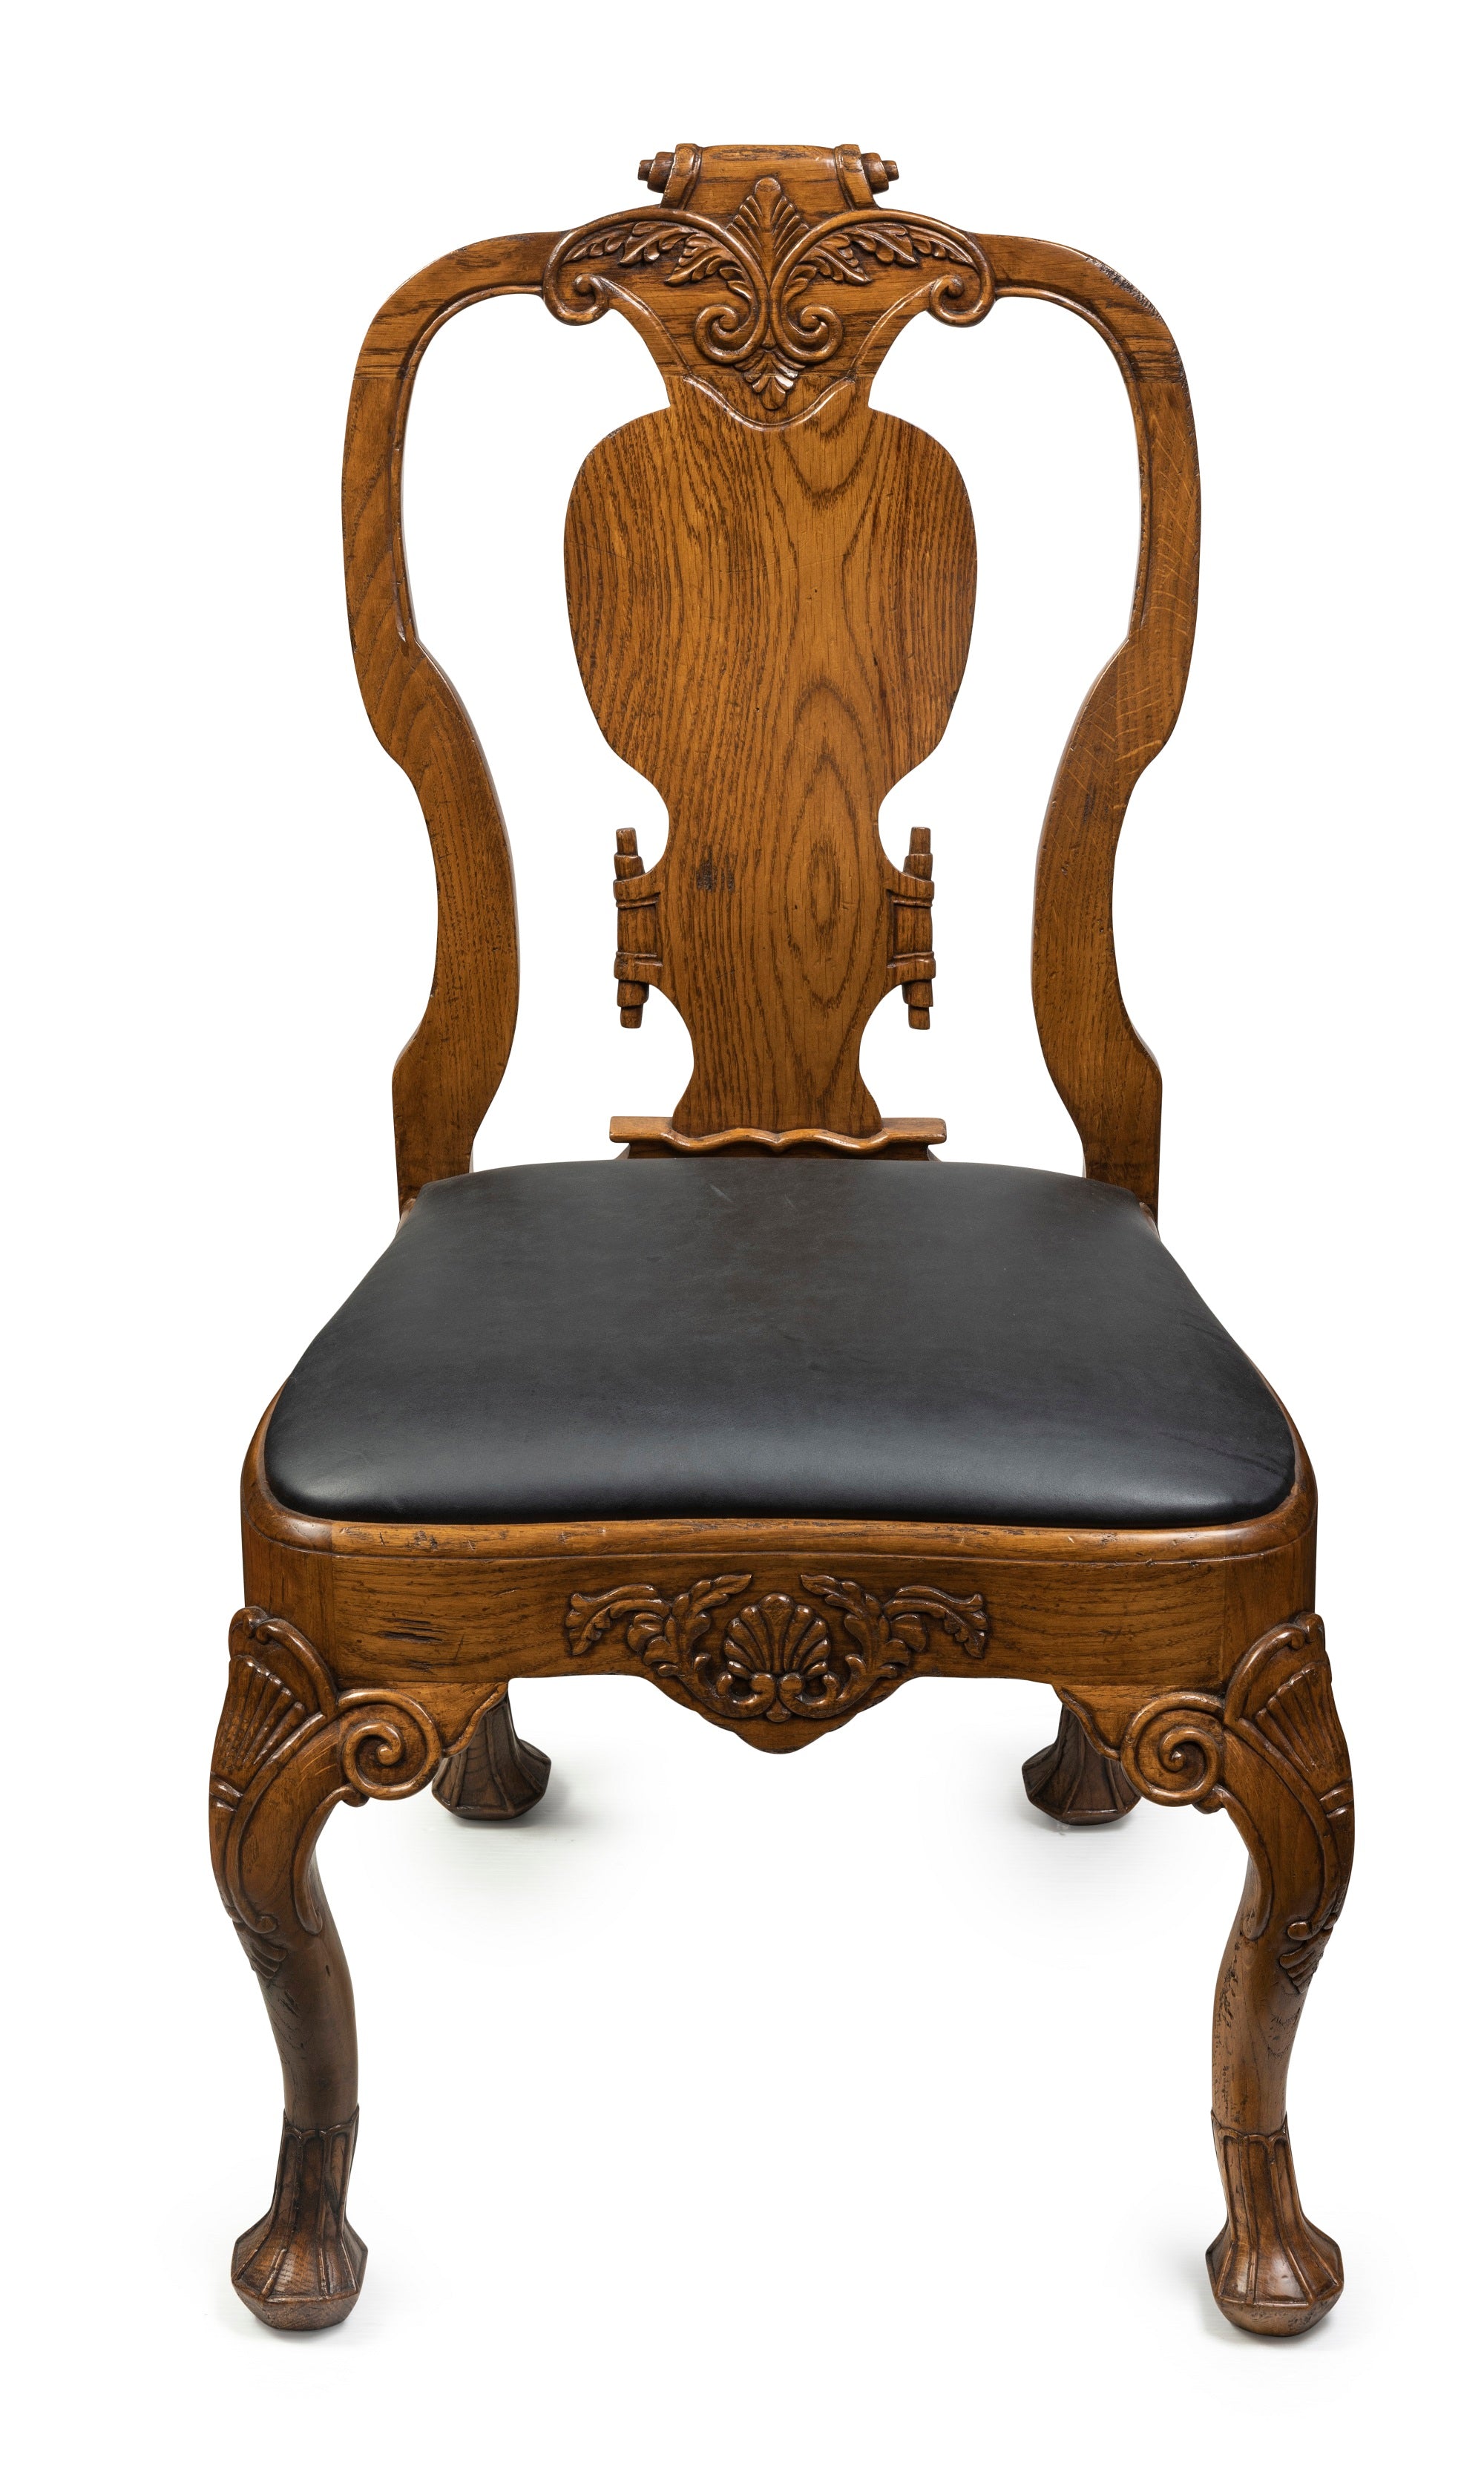 A Queen Anne Style Dining Chair